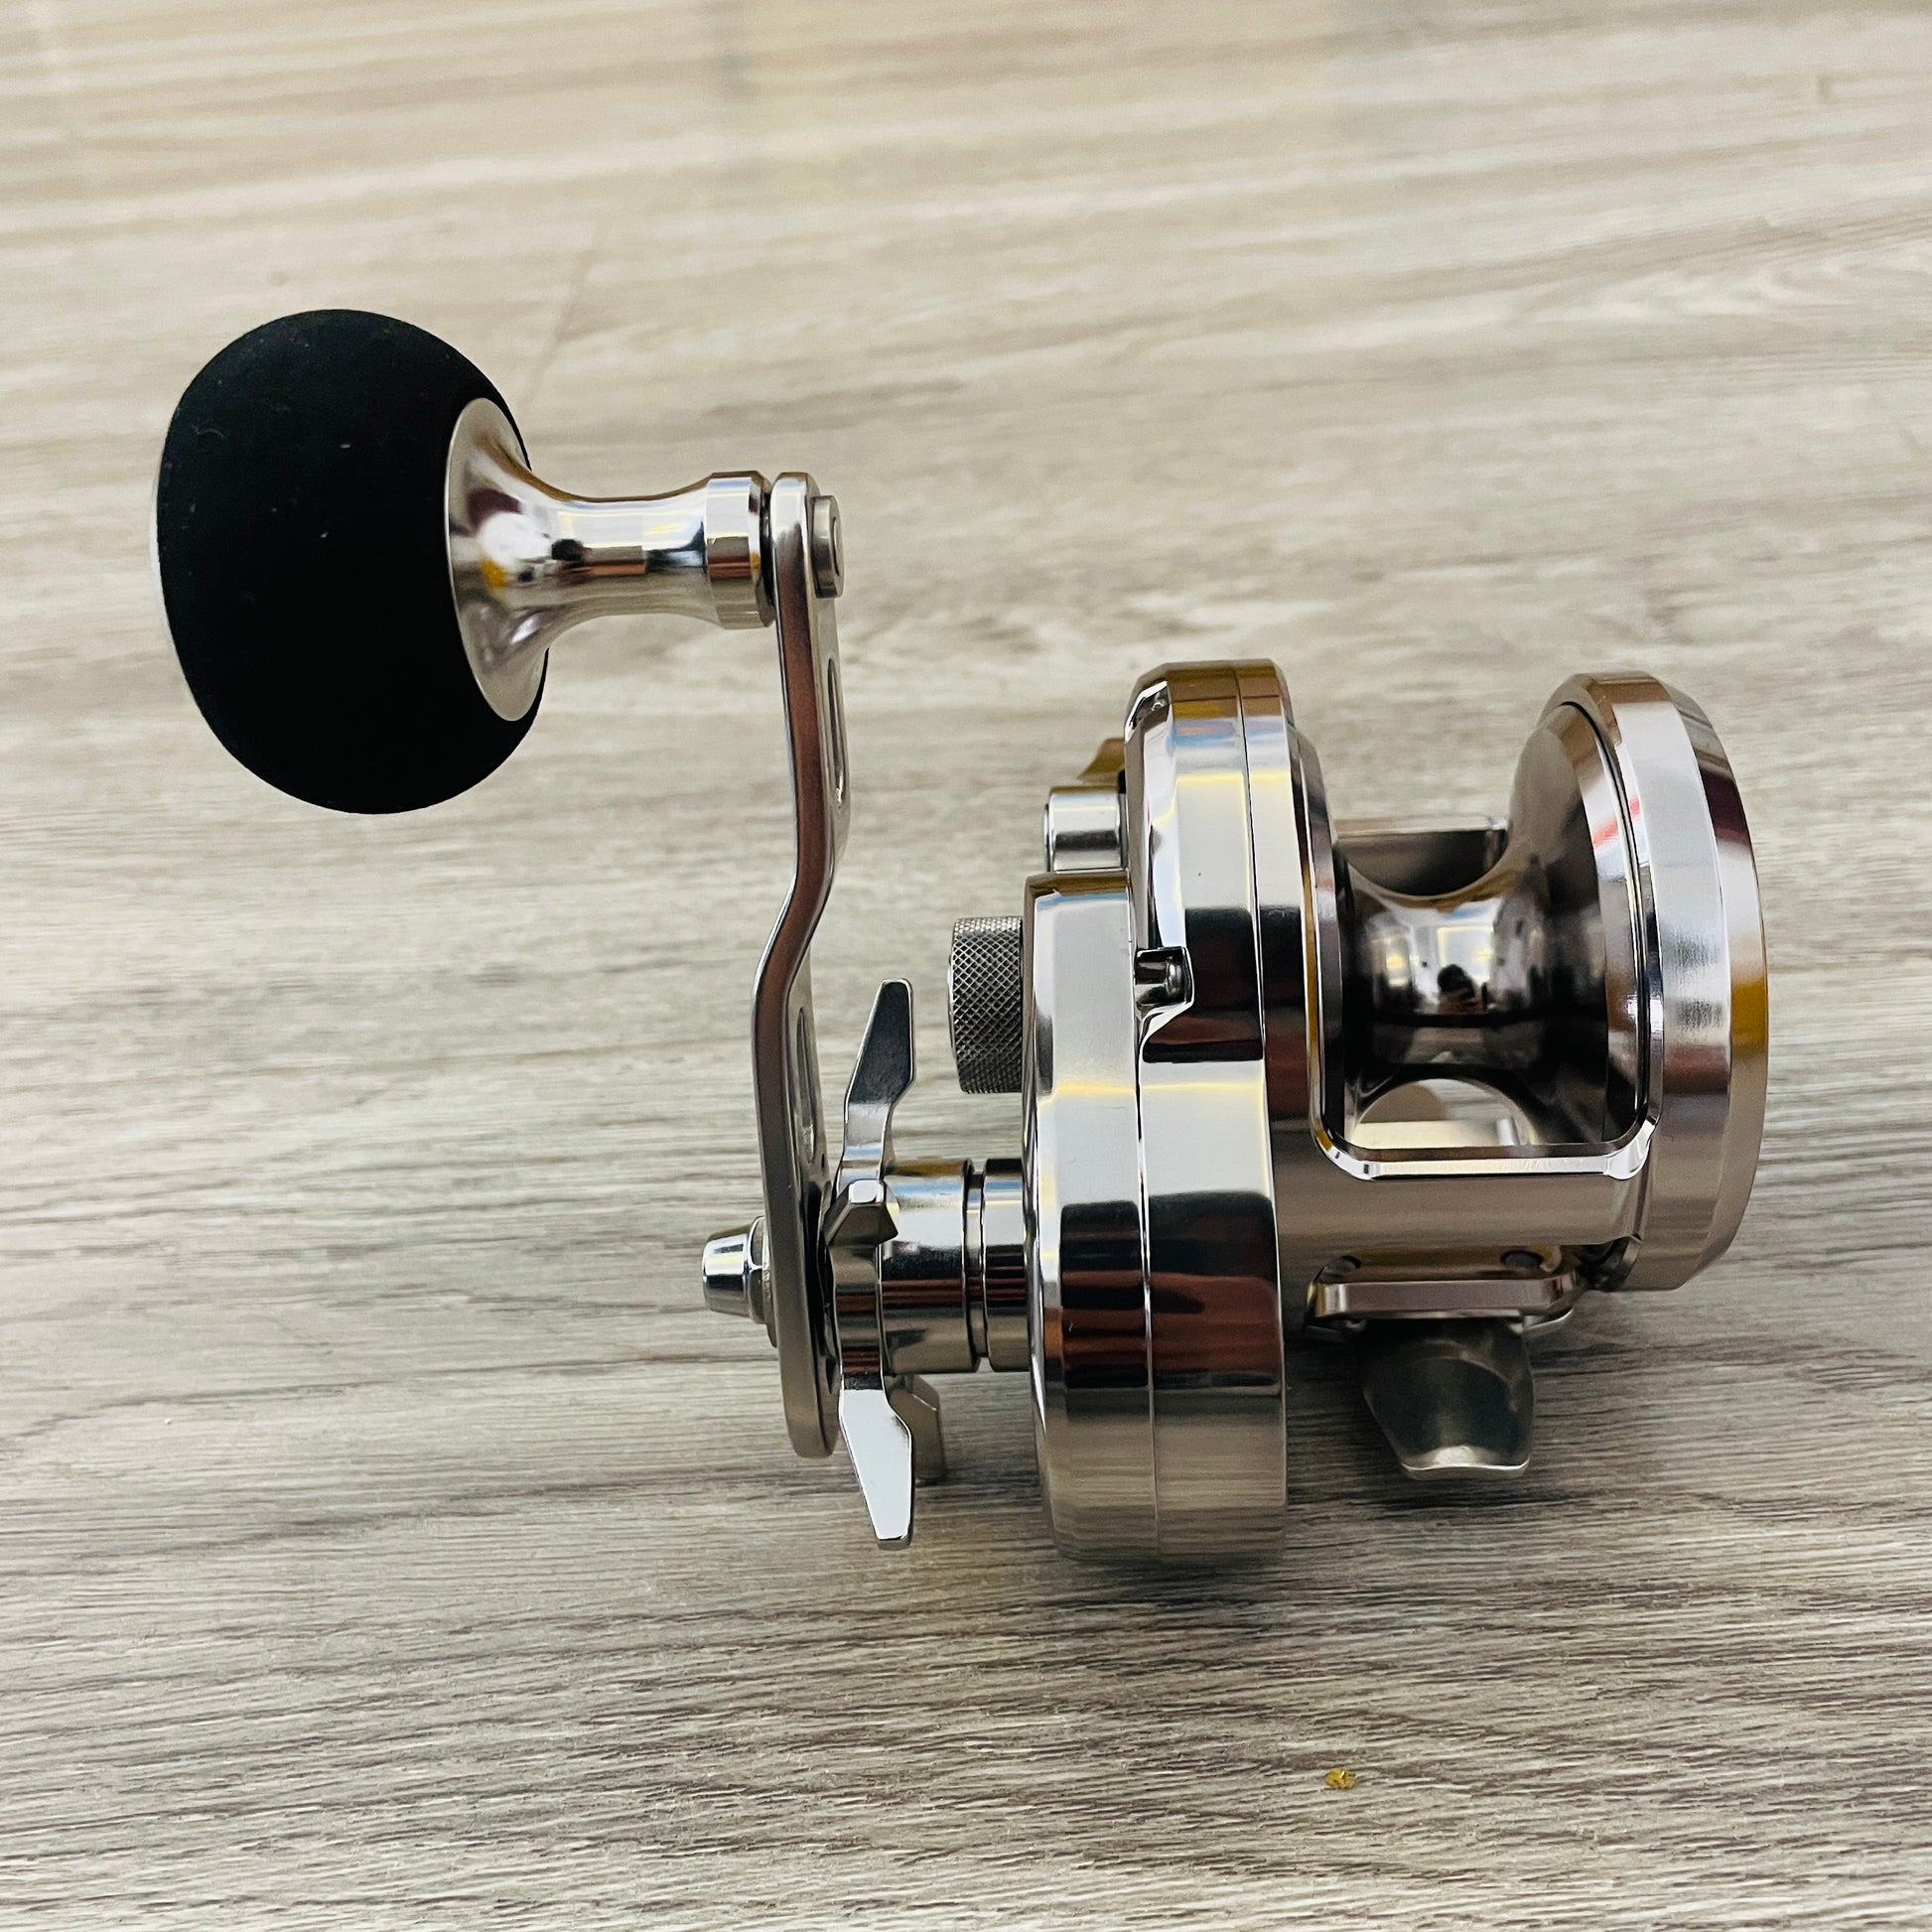 noeby fishing reel tackle, noeby fishing reel tackle Suppliers and